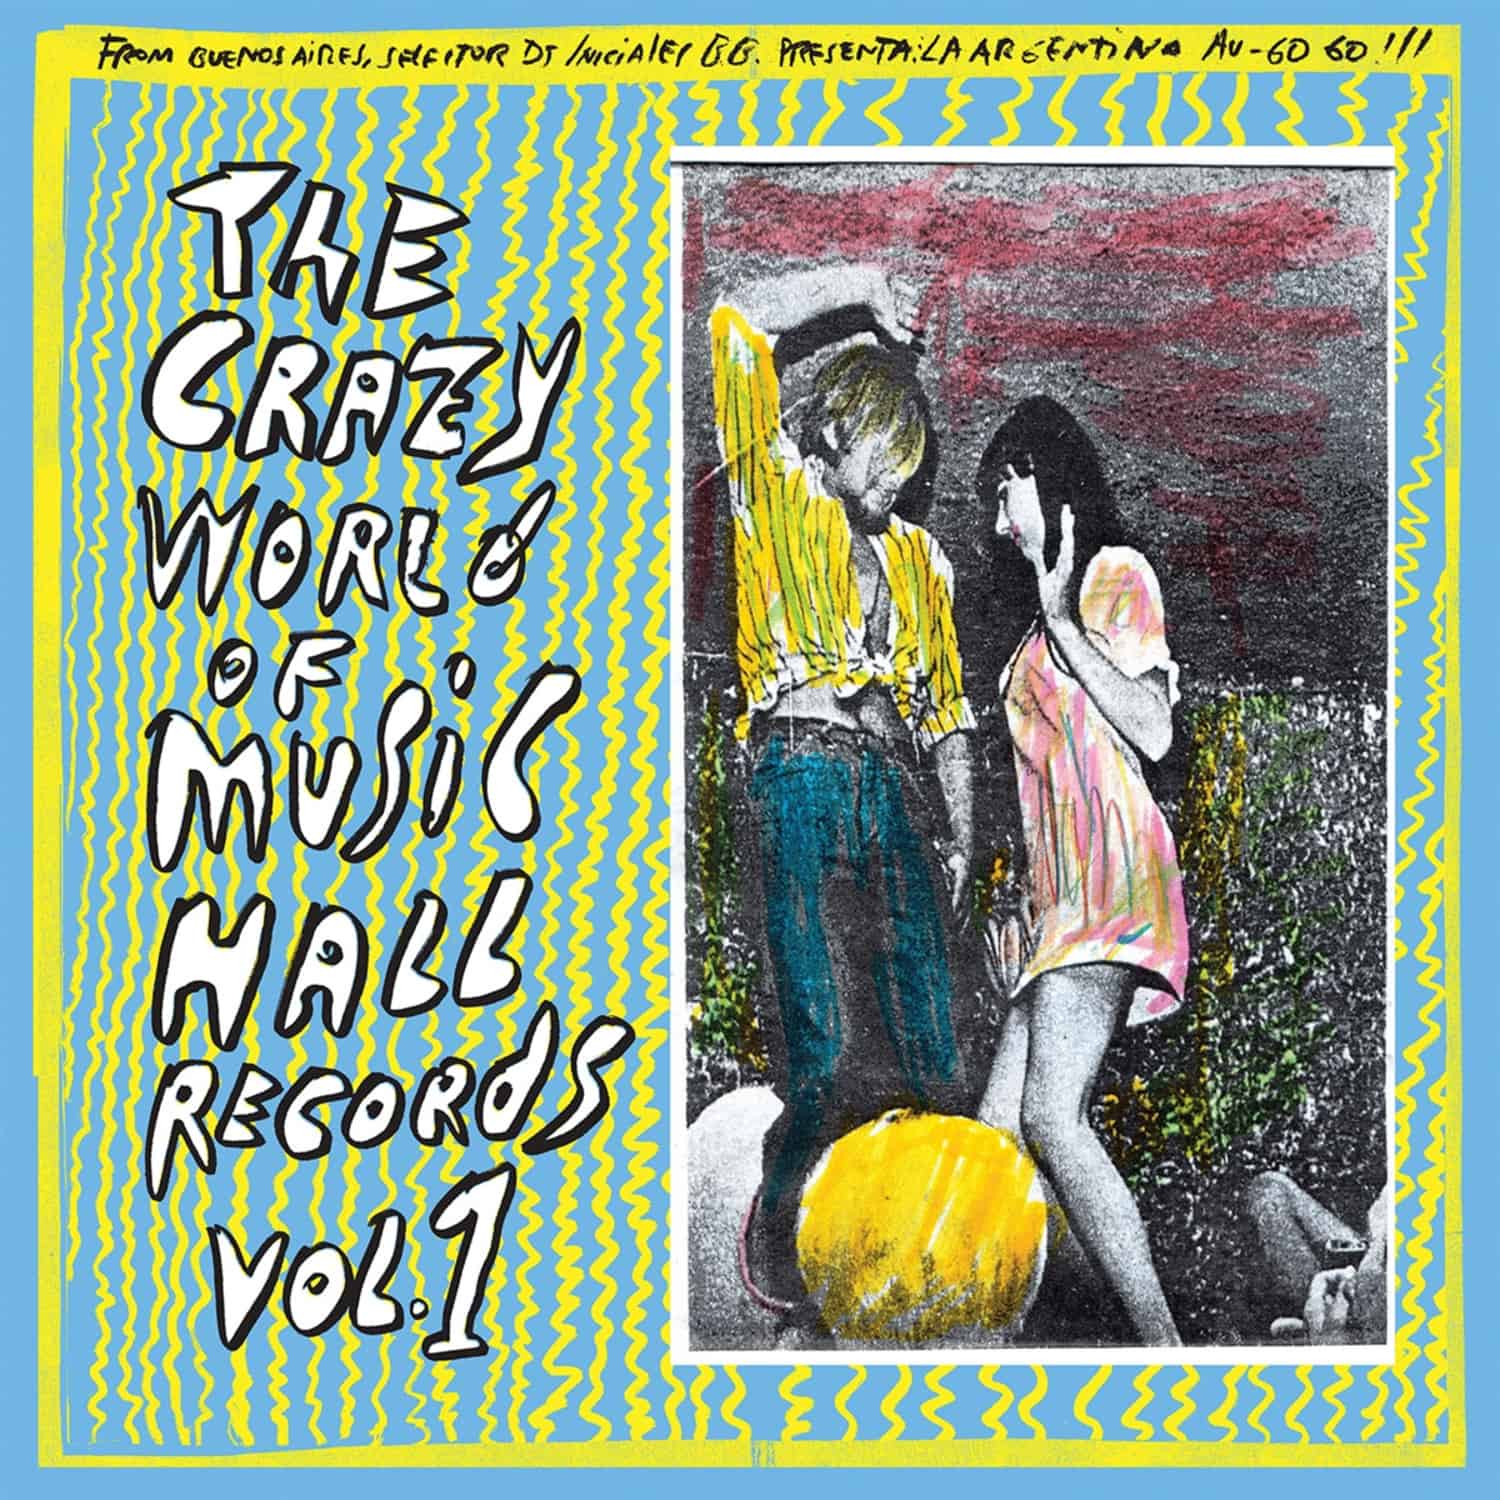 Various Artists - THE CRAZY WORLD OF MUSIC HALL VOL.1 